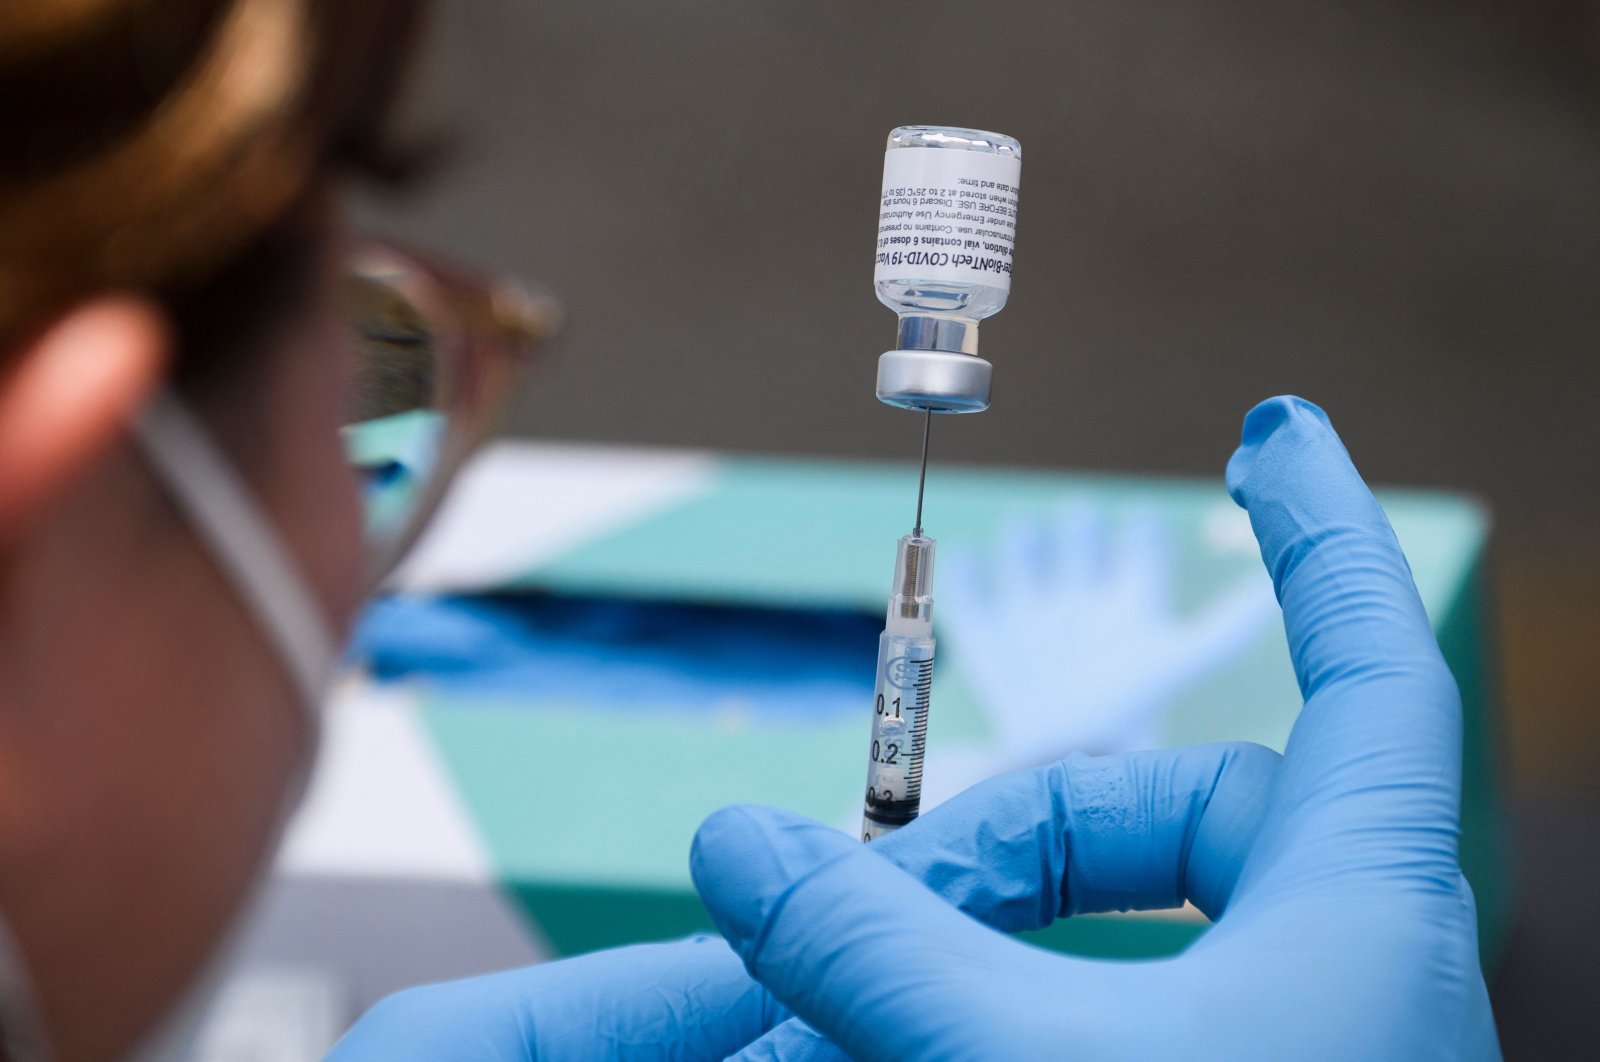 A syringe is filled with a first dose of the Pfizer-BioNTech COVID-19 vaccine at a mobile vaccination clinic during a back-to-school event offering school supplies, at the Weingart East Los Angeles YMCA in Los Angeles, California, U.S., Aug. 7, 2021. (AFP File Photo)